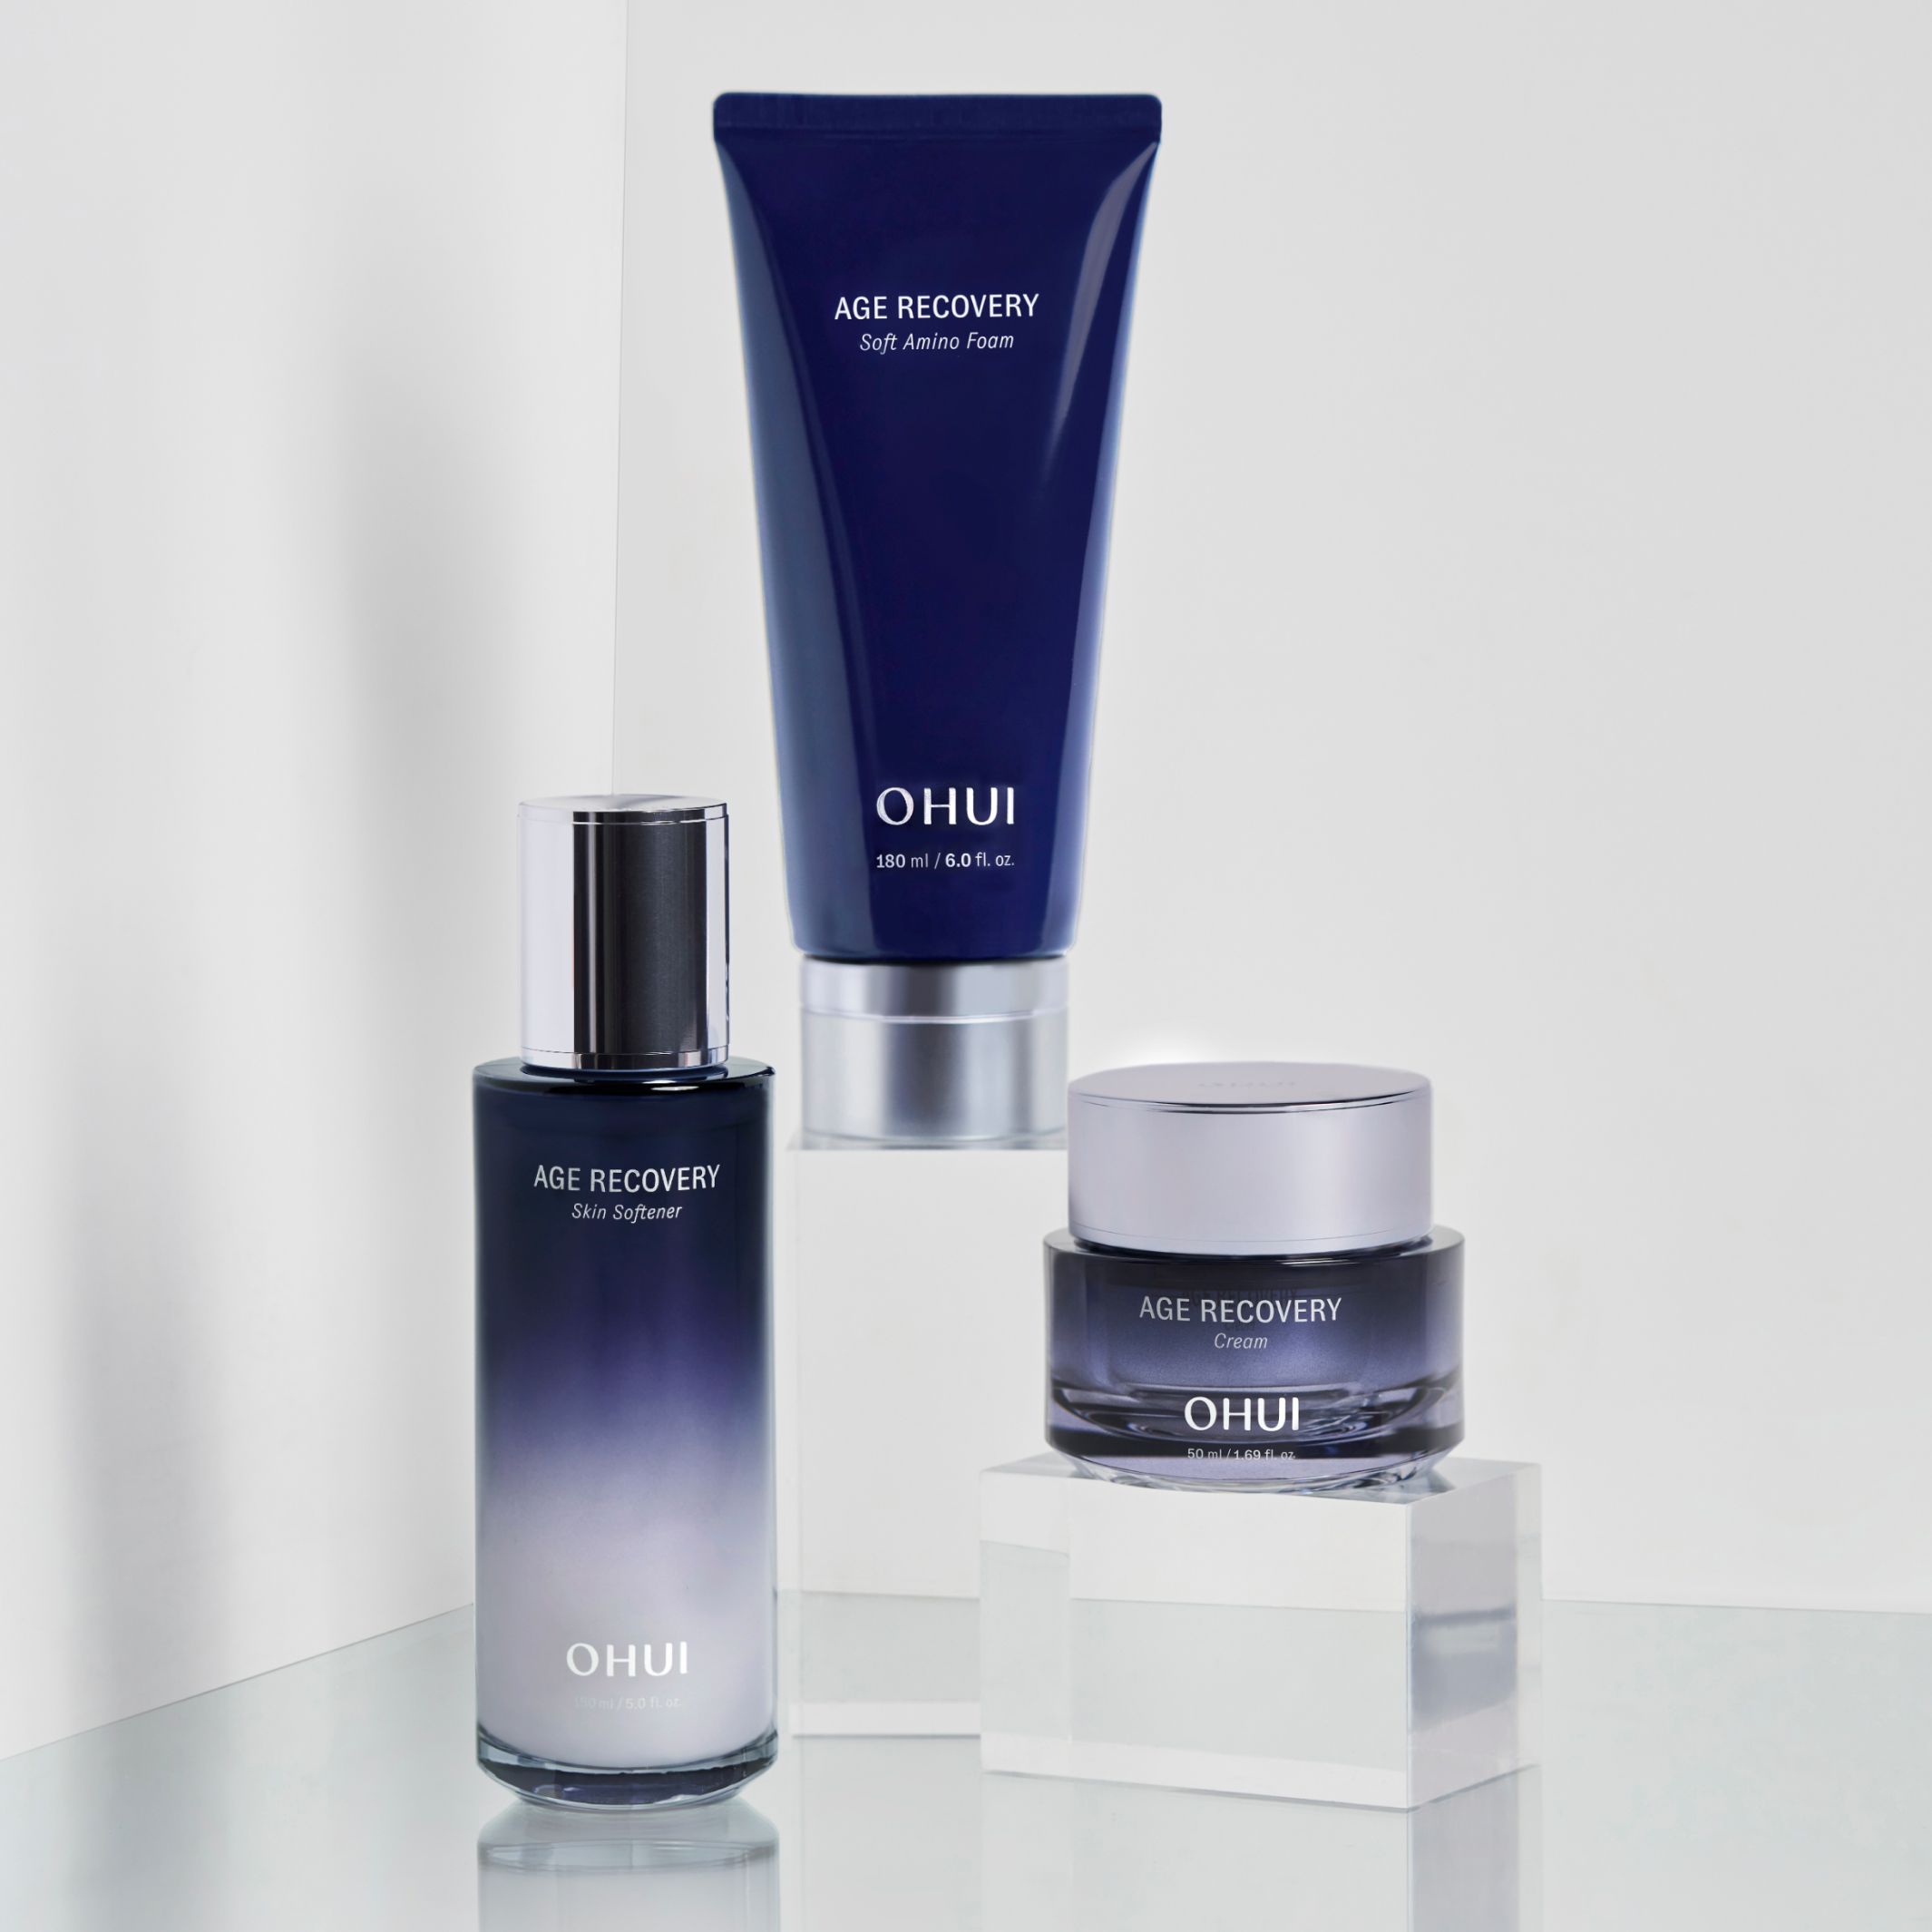 Three products from the OHUI Age Recovery collection showcased against a white backdrop.